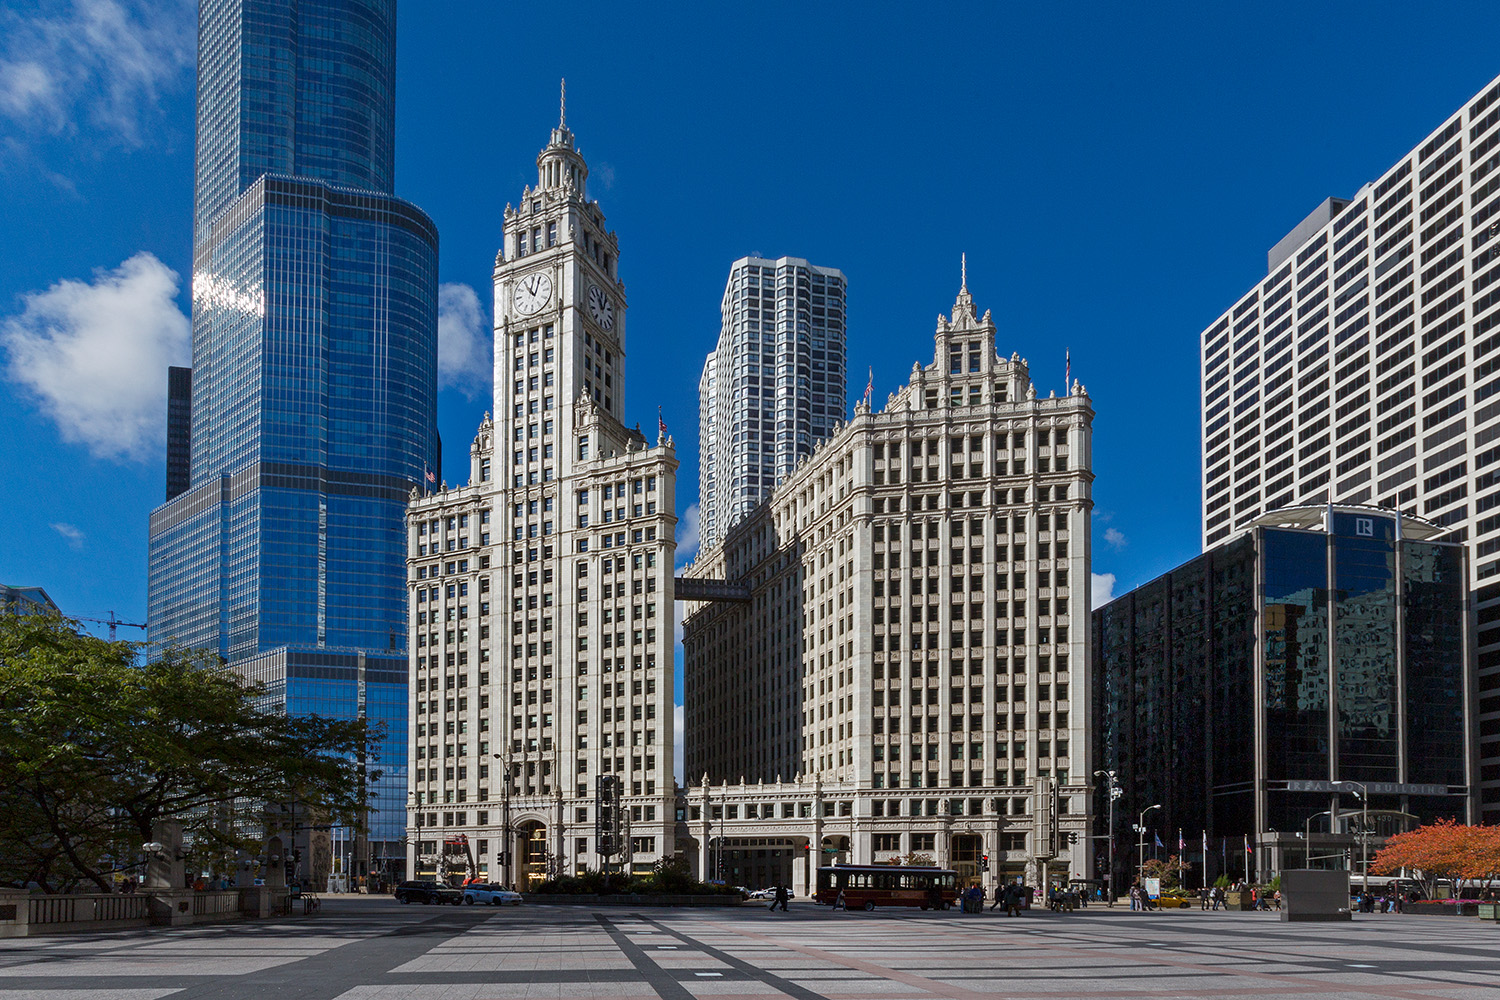 Wrigley Building / Chicago IL / For The New York Times